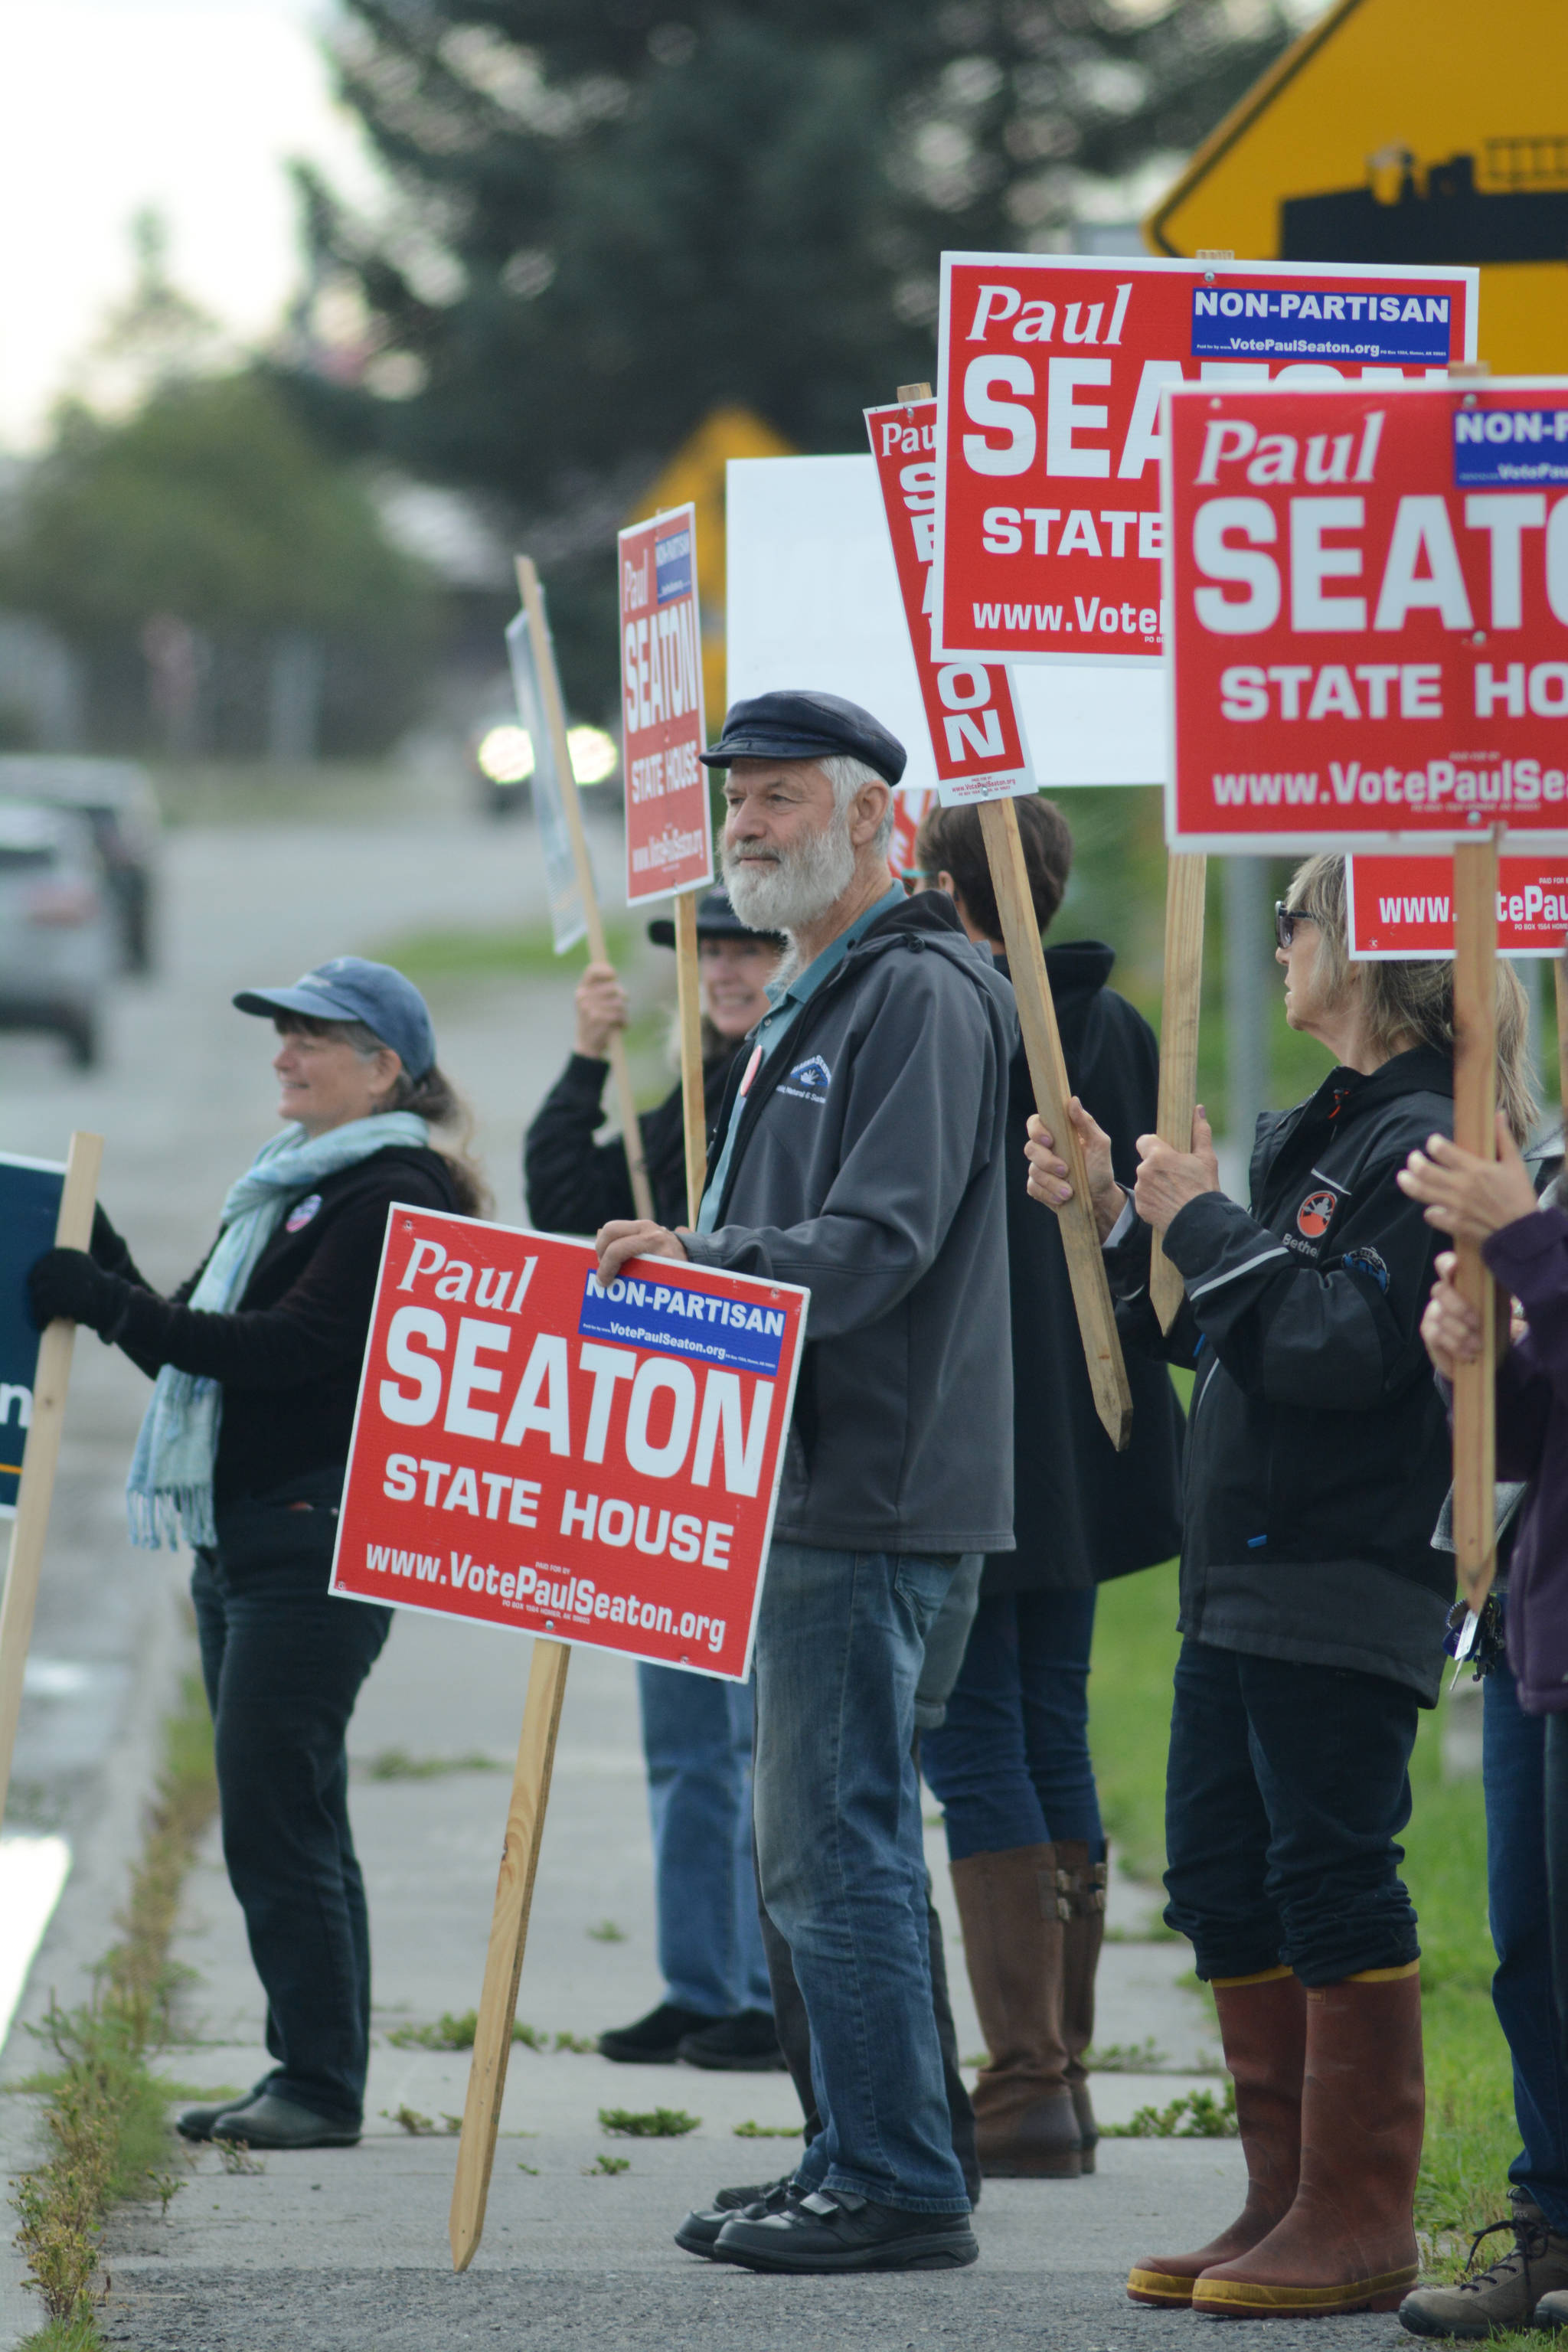 Rep. Paul Seaton, NP-Homer, center, is joined by supporters waving signs on primary election day, Aug. 21, 2018, at the corner of Lake Street and Pioneer Avenue in Homer. Seaton ran unapposed as a nonpartisan candidate for the Alaska Democratic Party seat. Also waving signs are supporters of Alyse Galvin, a nonpartisan candidate for the Democratic Party seat for U.S. Congress. Galvin won the Democratic Party nomination. (Photo by Michael Armstrong/Homer News)